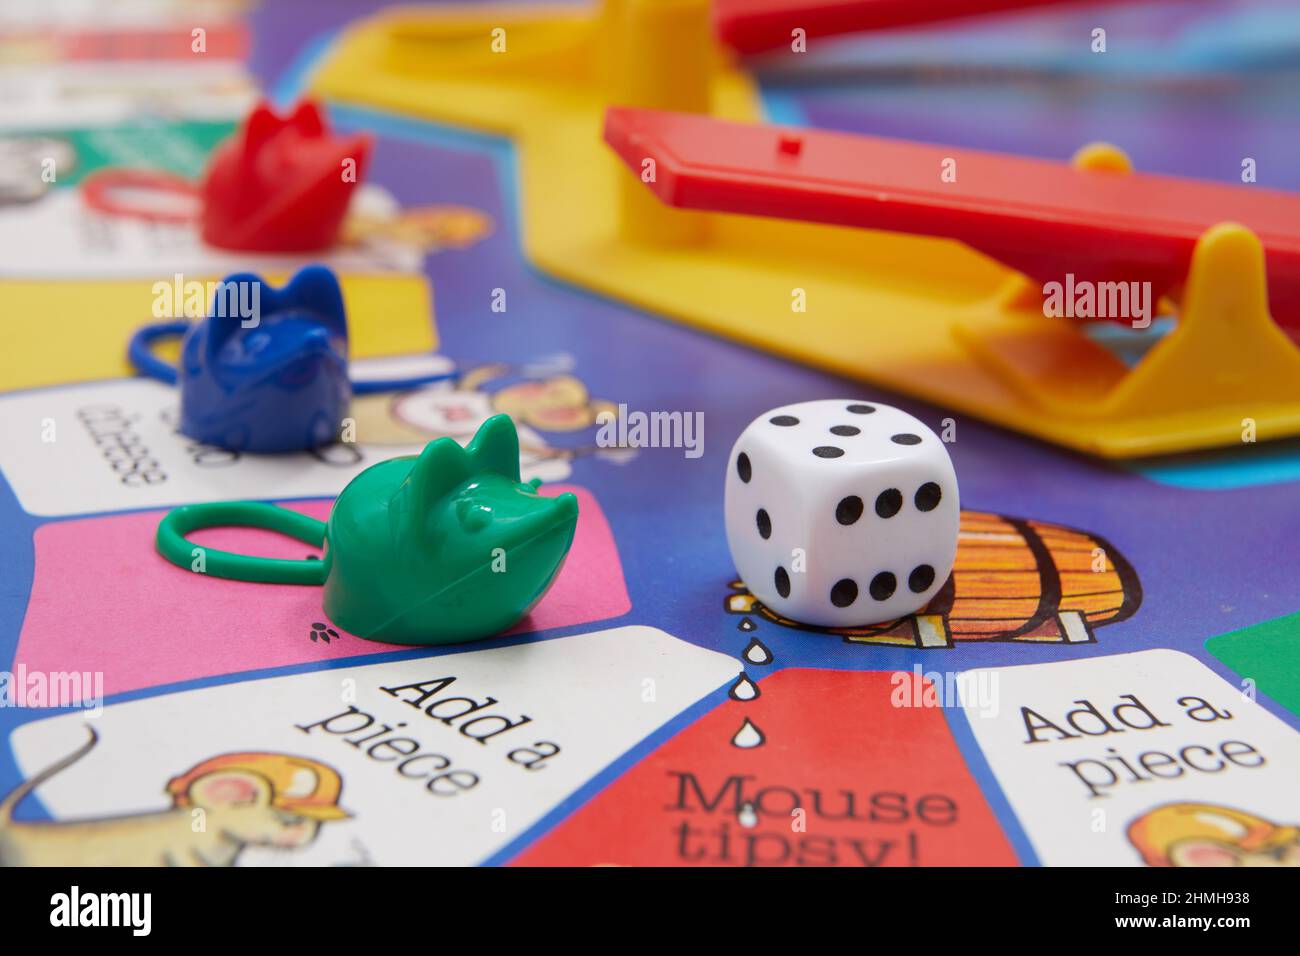 Mouse Trap - The Board Game - Apps on Google Play